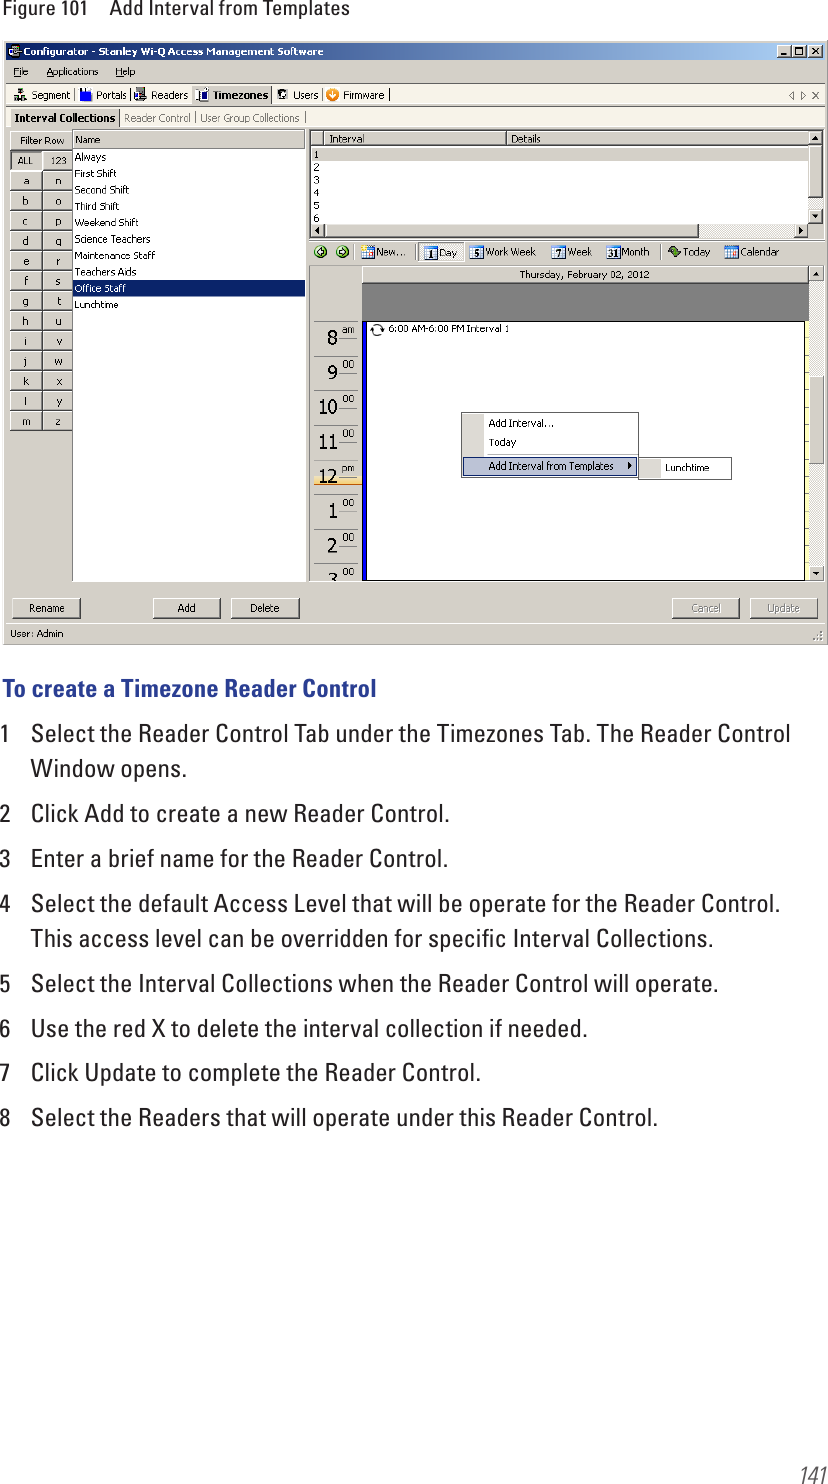 141Figure 101  Add Interval from TemplatesTo create a Timezone Reader Control1  Select the Reader Control Tab under the Timezones Tab. The Reader Control Window opens.2  Click Add to create a new Reader Control.3  Enter a brief name for the Reader Control.4  Select the default Access Level that will be operate for the Reader Control. This access level can be overridden for speciﬁc Interval Collections.5  Select the Interval Collections when the Reader Control will operate.6  Use the red X to delete the interval collection if needed.7  Click Update to complete the Reader Control.8  Select the Readers that will operate under this Reader Control.